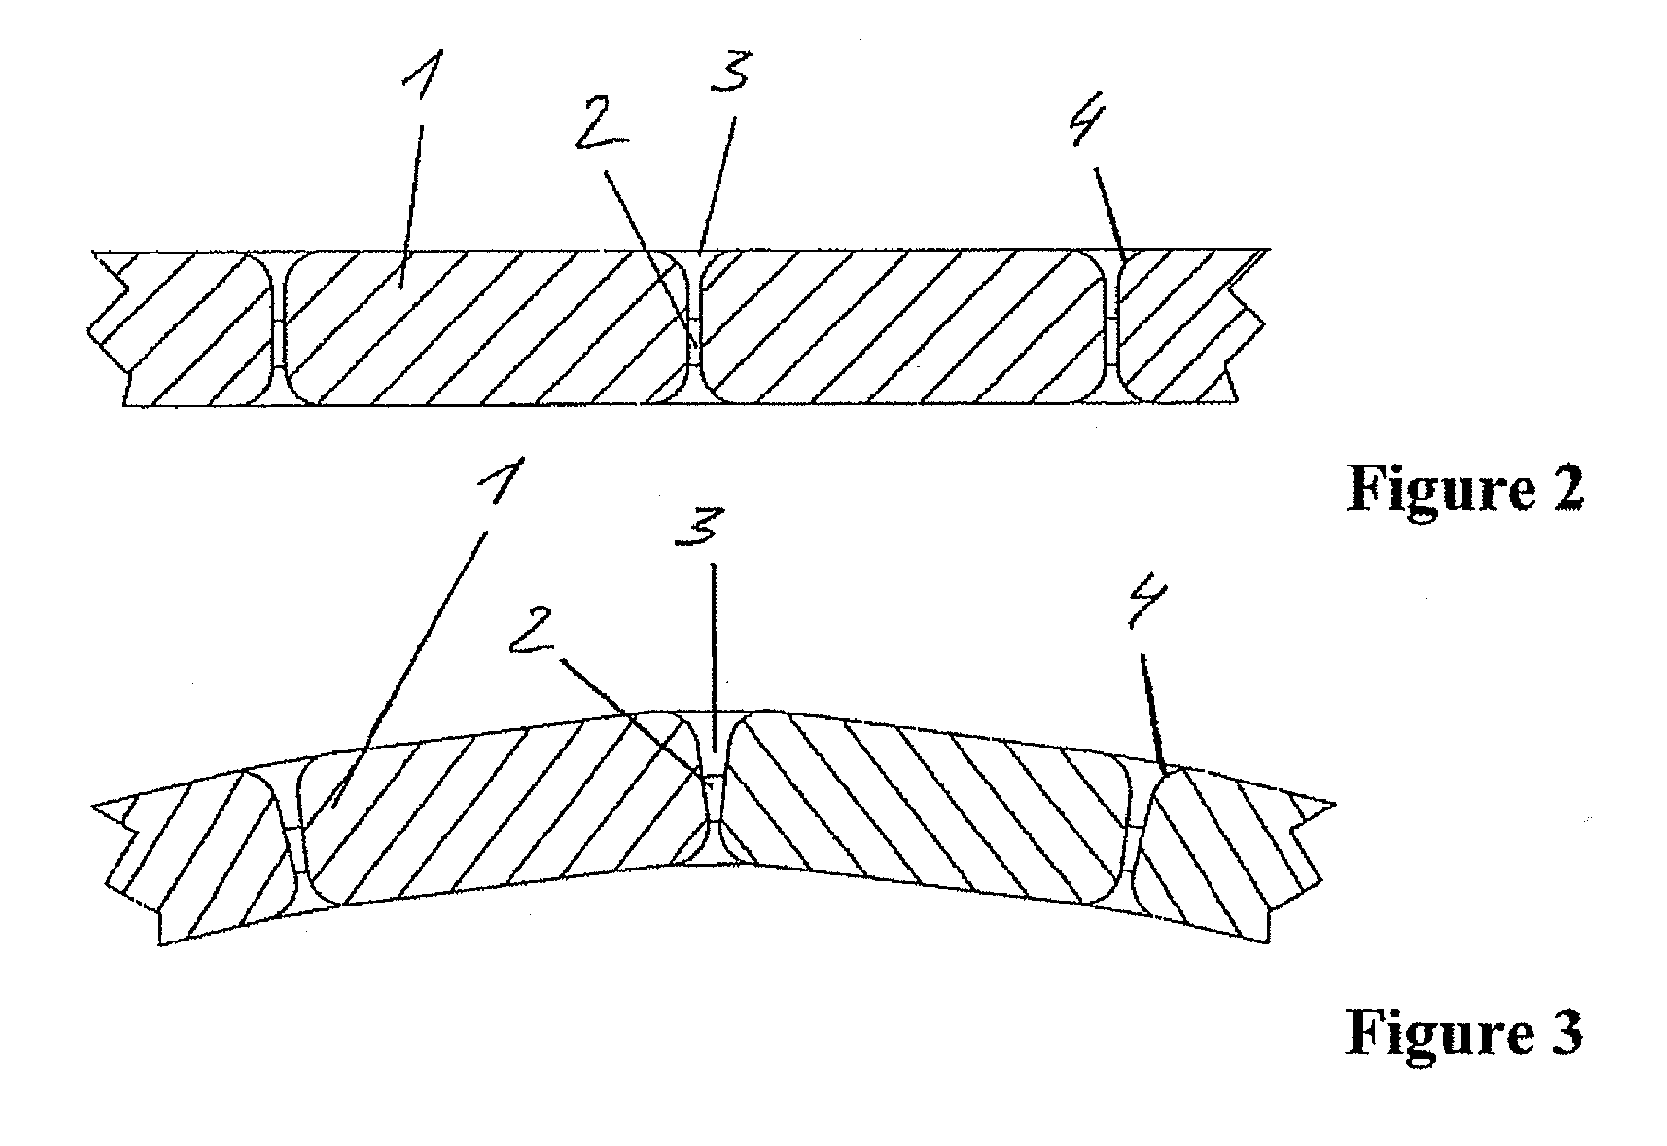 Method for Manufacturing a Three-Dimensionally Deformable, Sheet-Like Refinforcing Structure